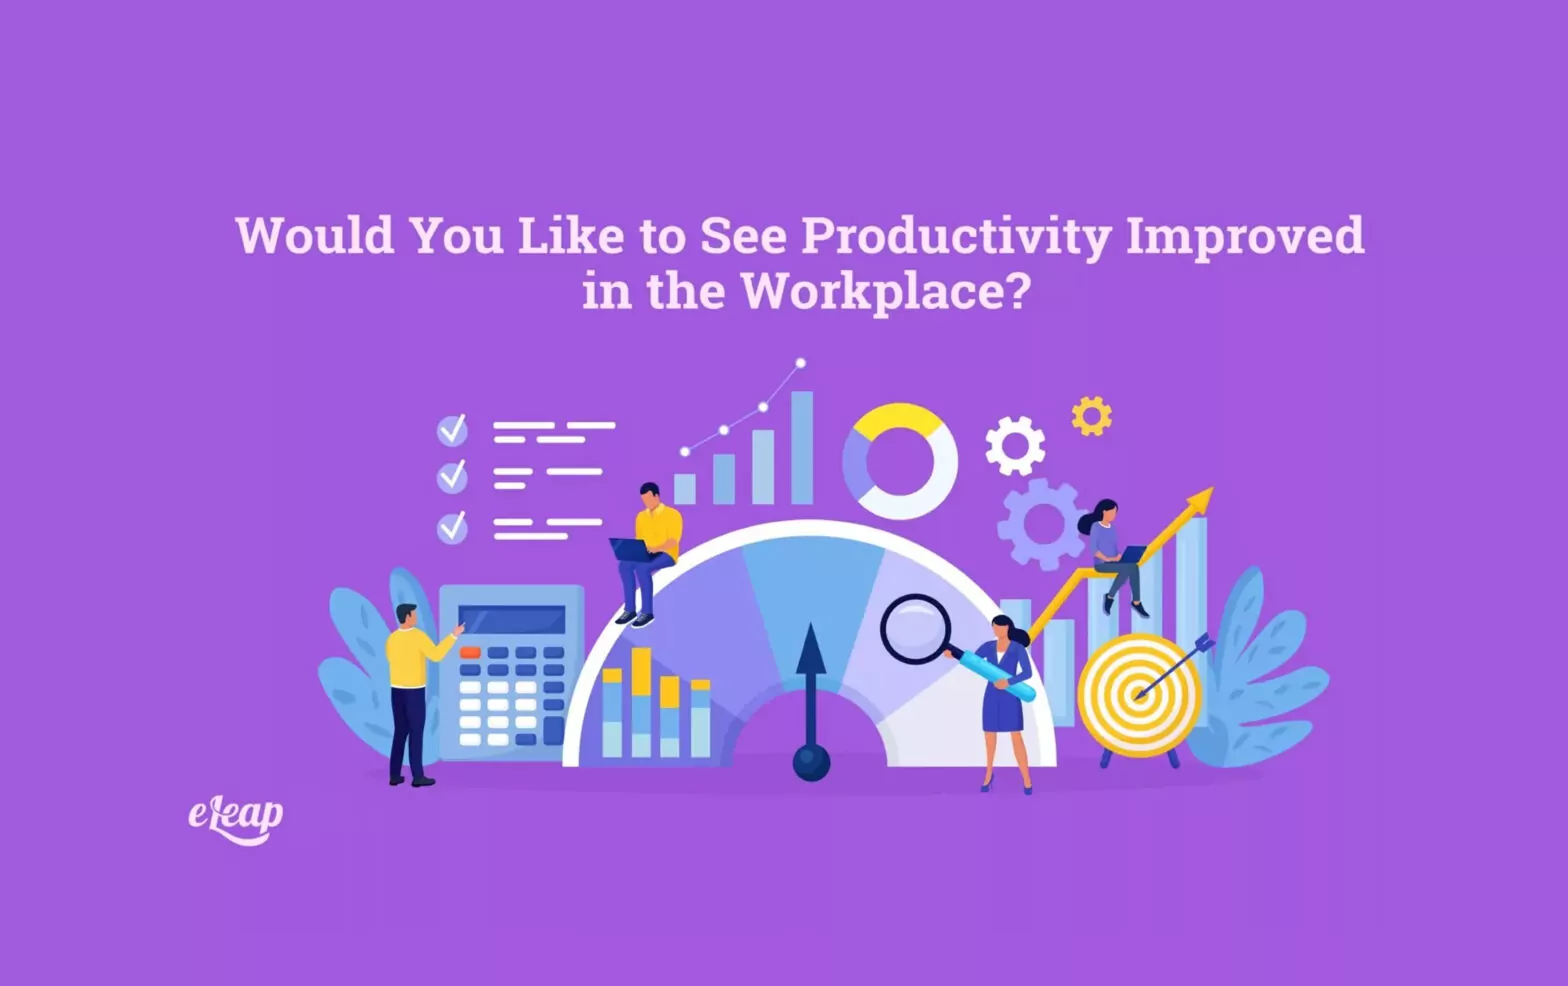 Would You Like to See Productivity Improved in the Workplace?